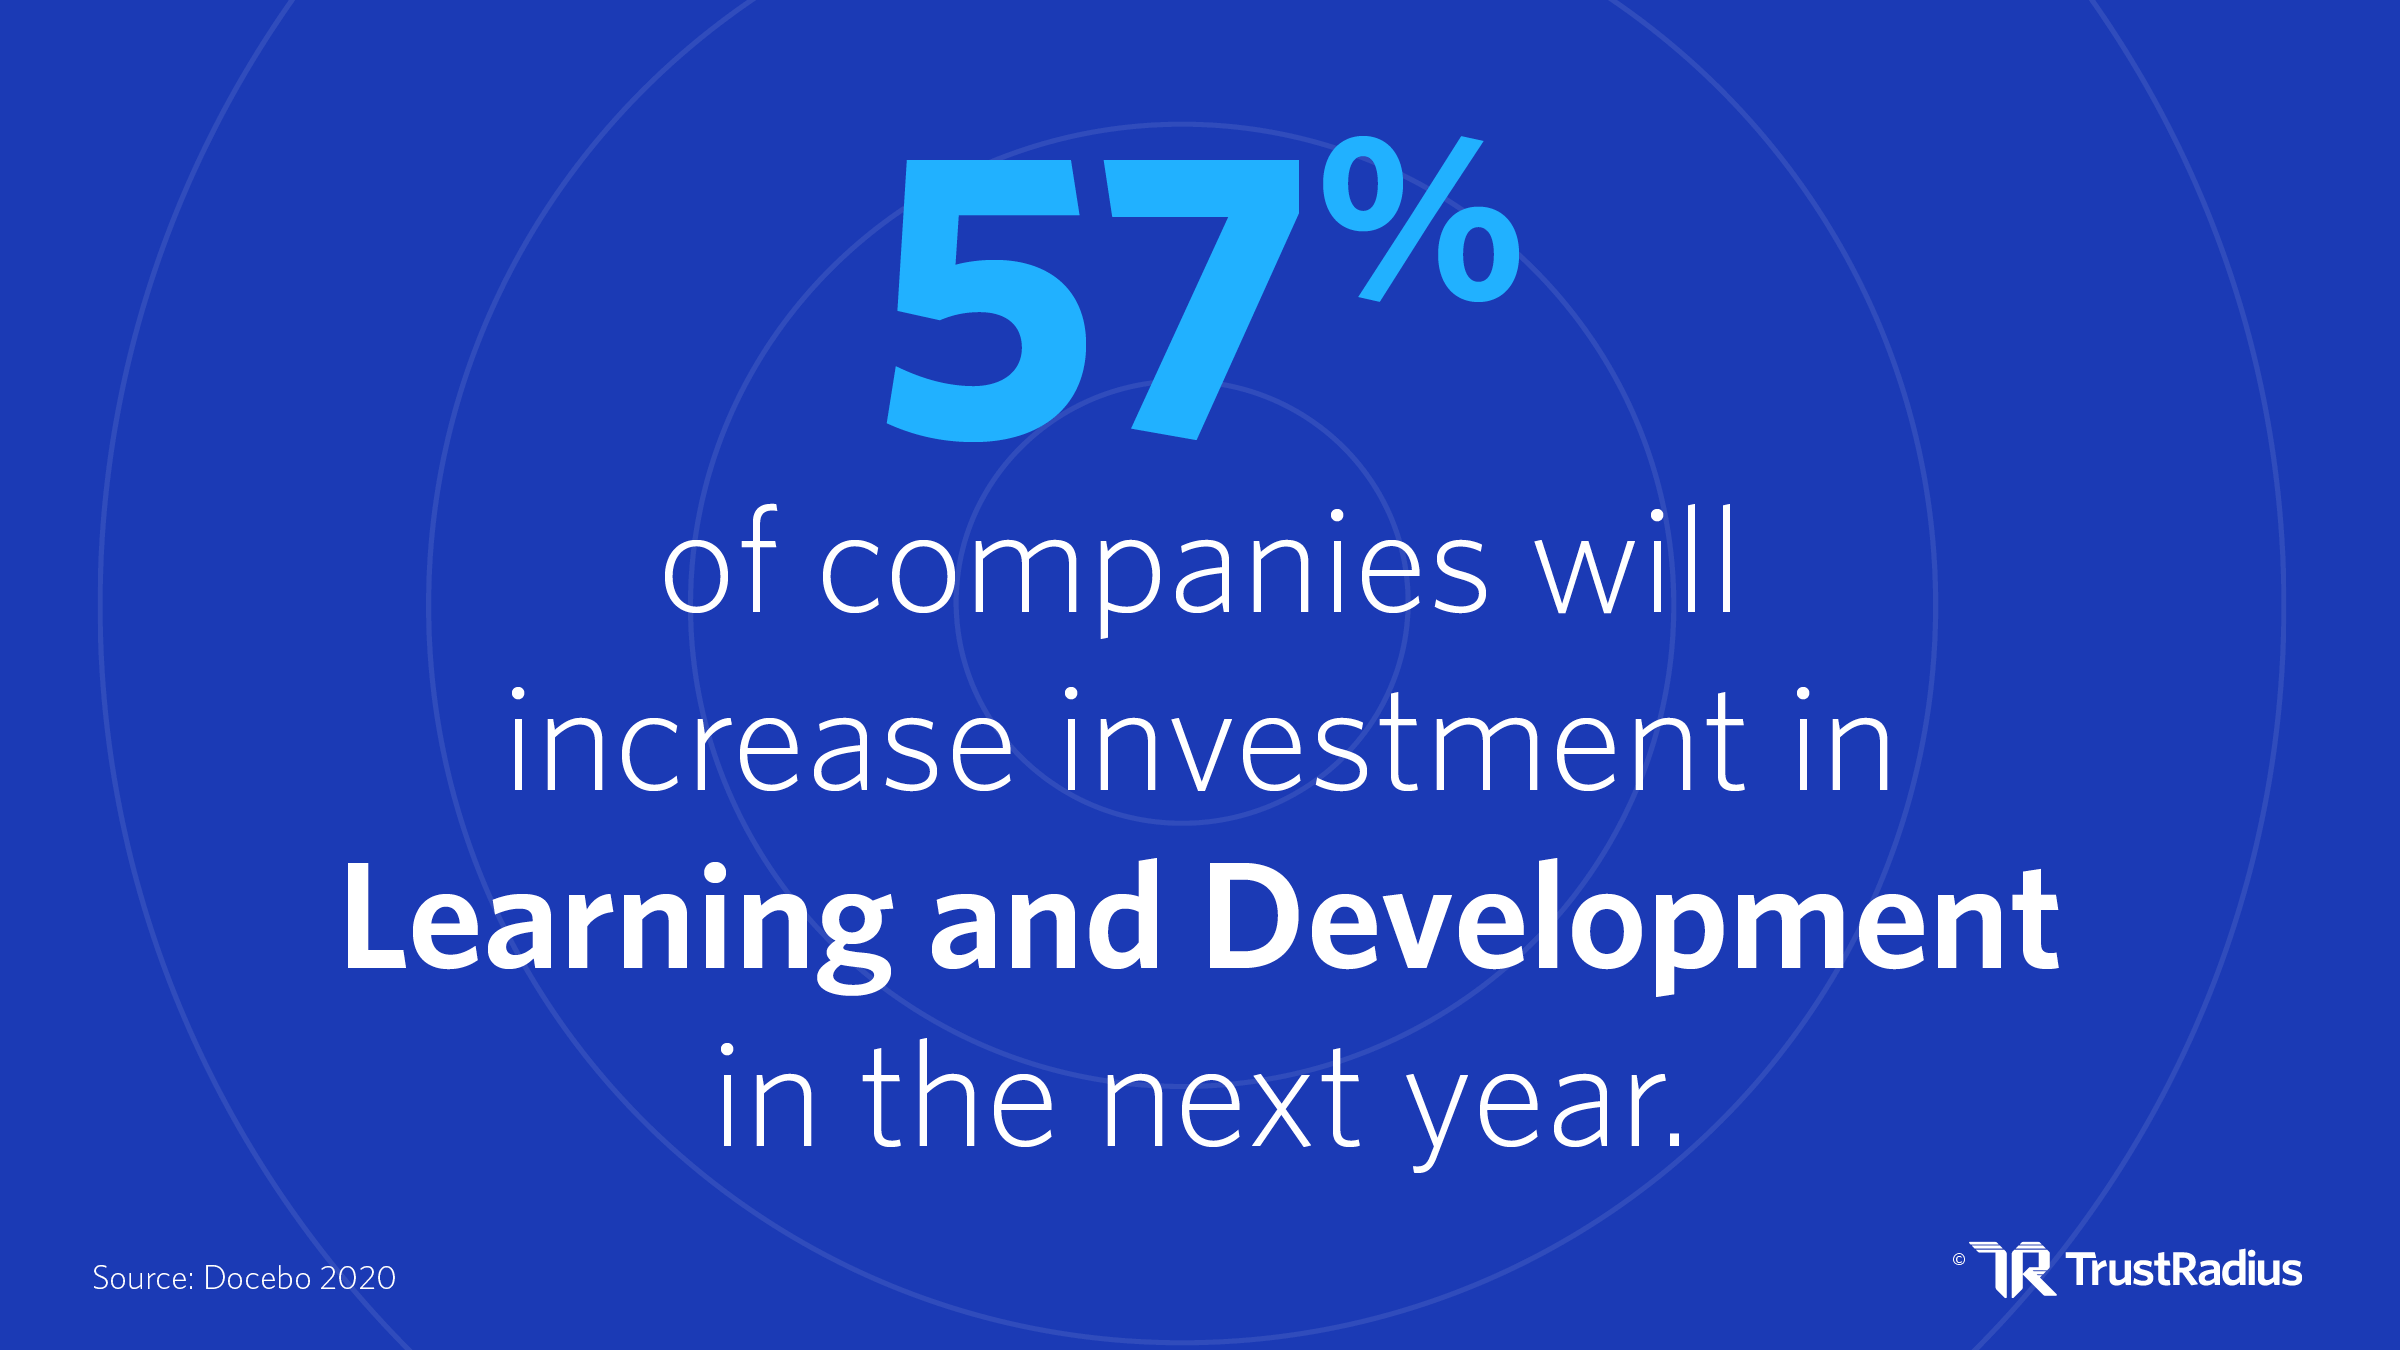 57% of companies will increase investment in learning and development in the next year